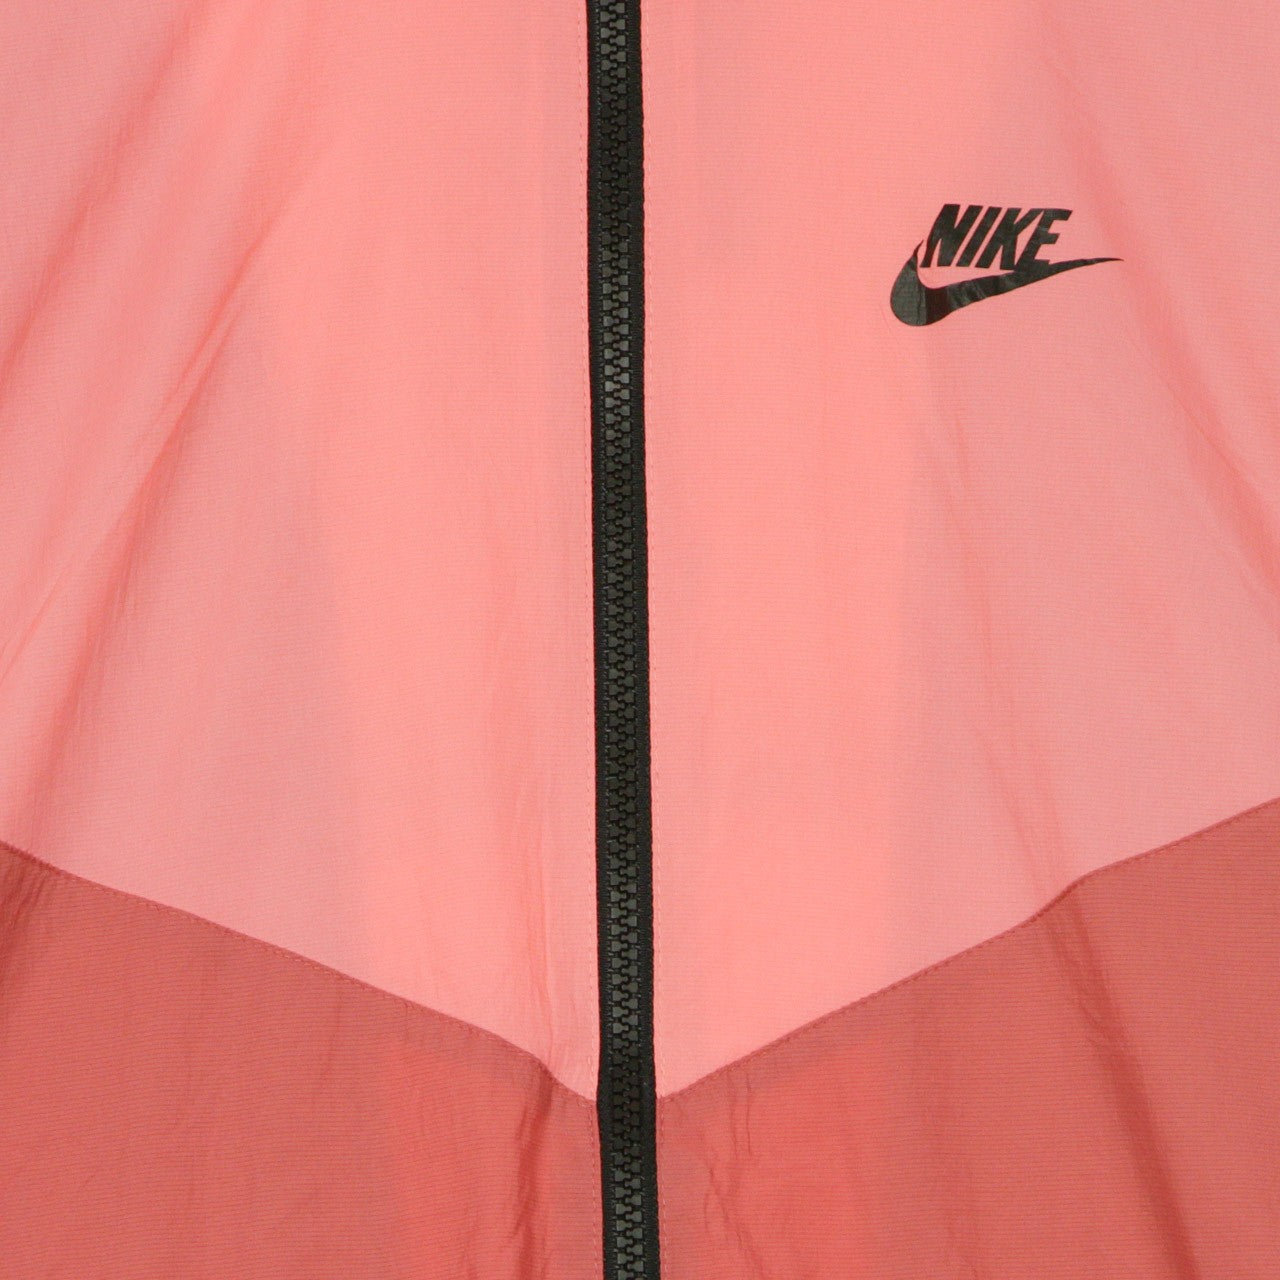 Nike, Giacca Lunga Donna W Windrunner Jacket Trench, 